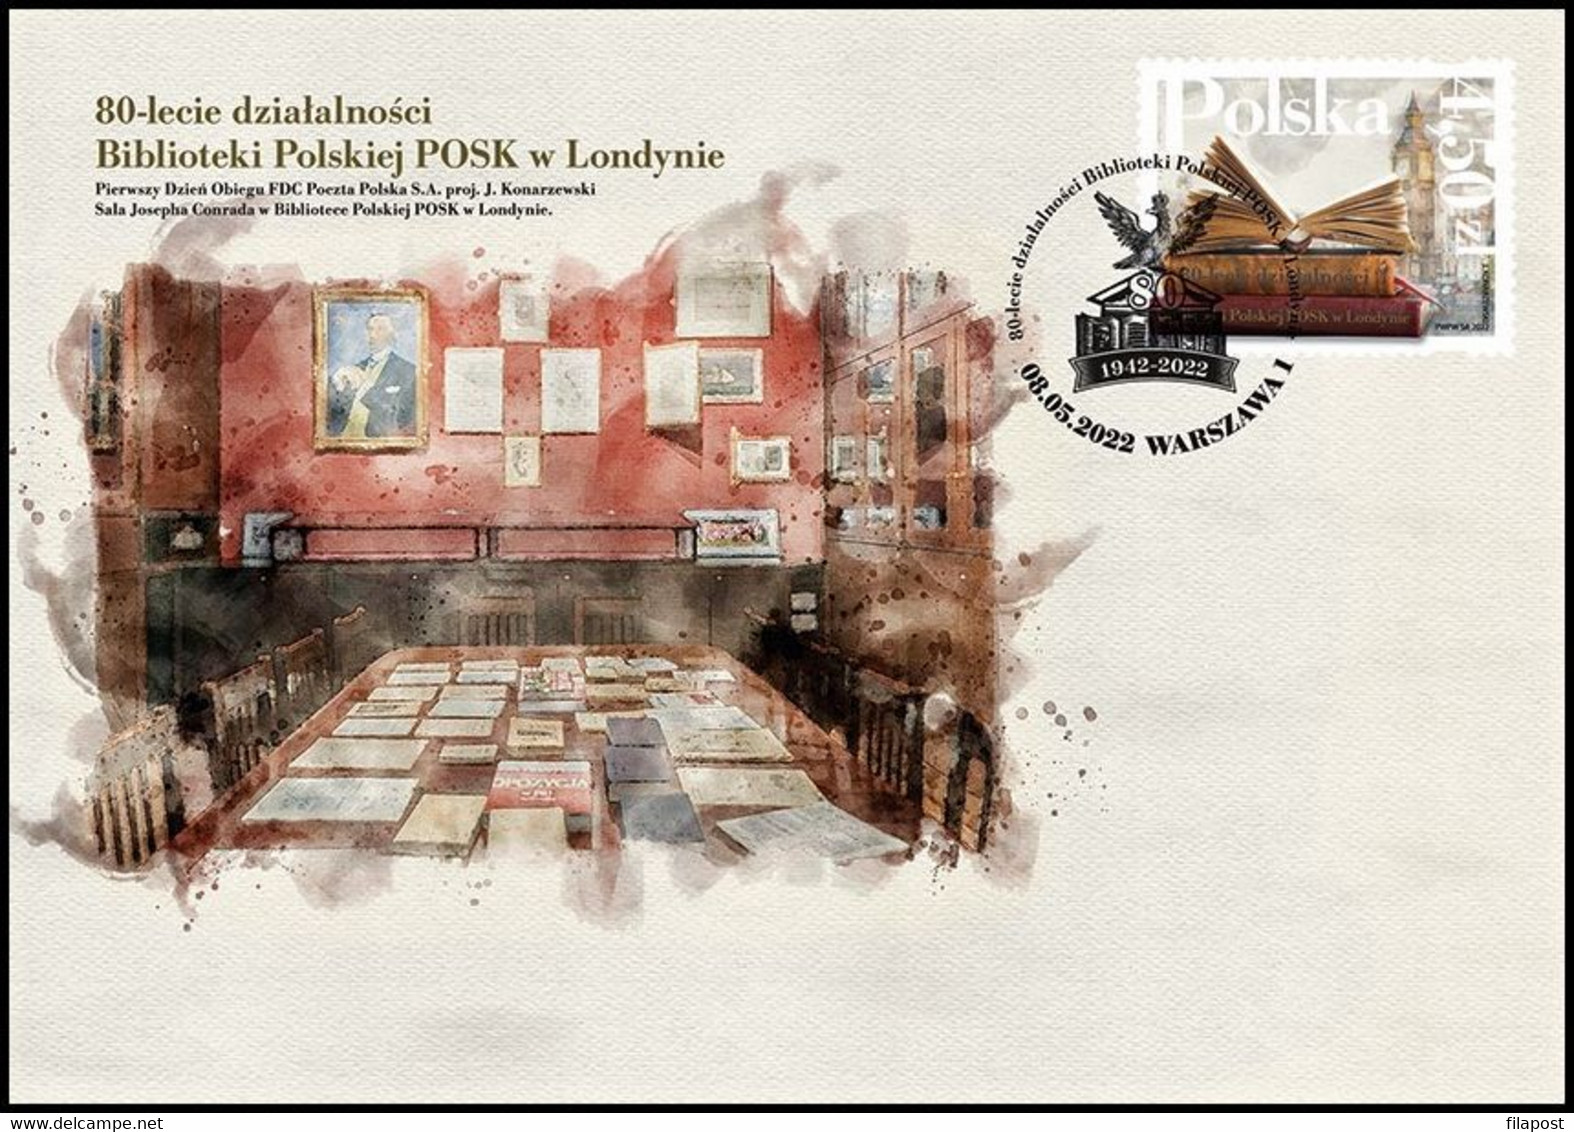 Poland 2022 / POSK Polish Library In London, Book, Big Ben Tower, Books, Archives, Manuscripts / Full Sheet FDC New!!! - Covers & Documents